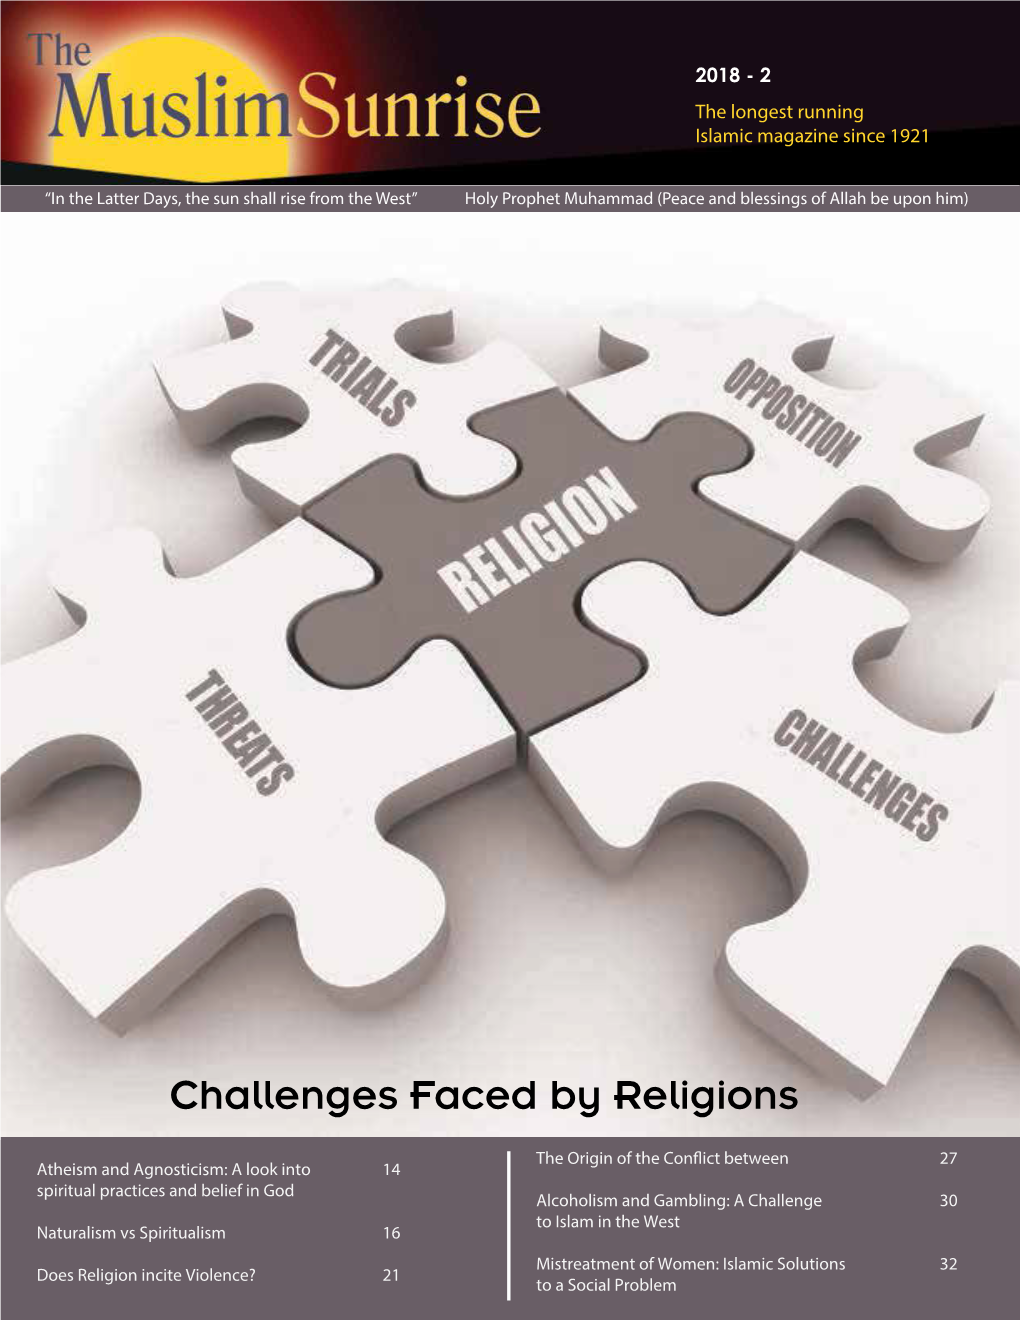 Challenges Faced by Religions